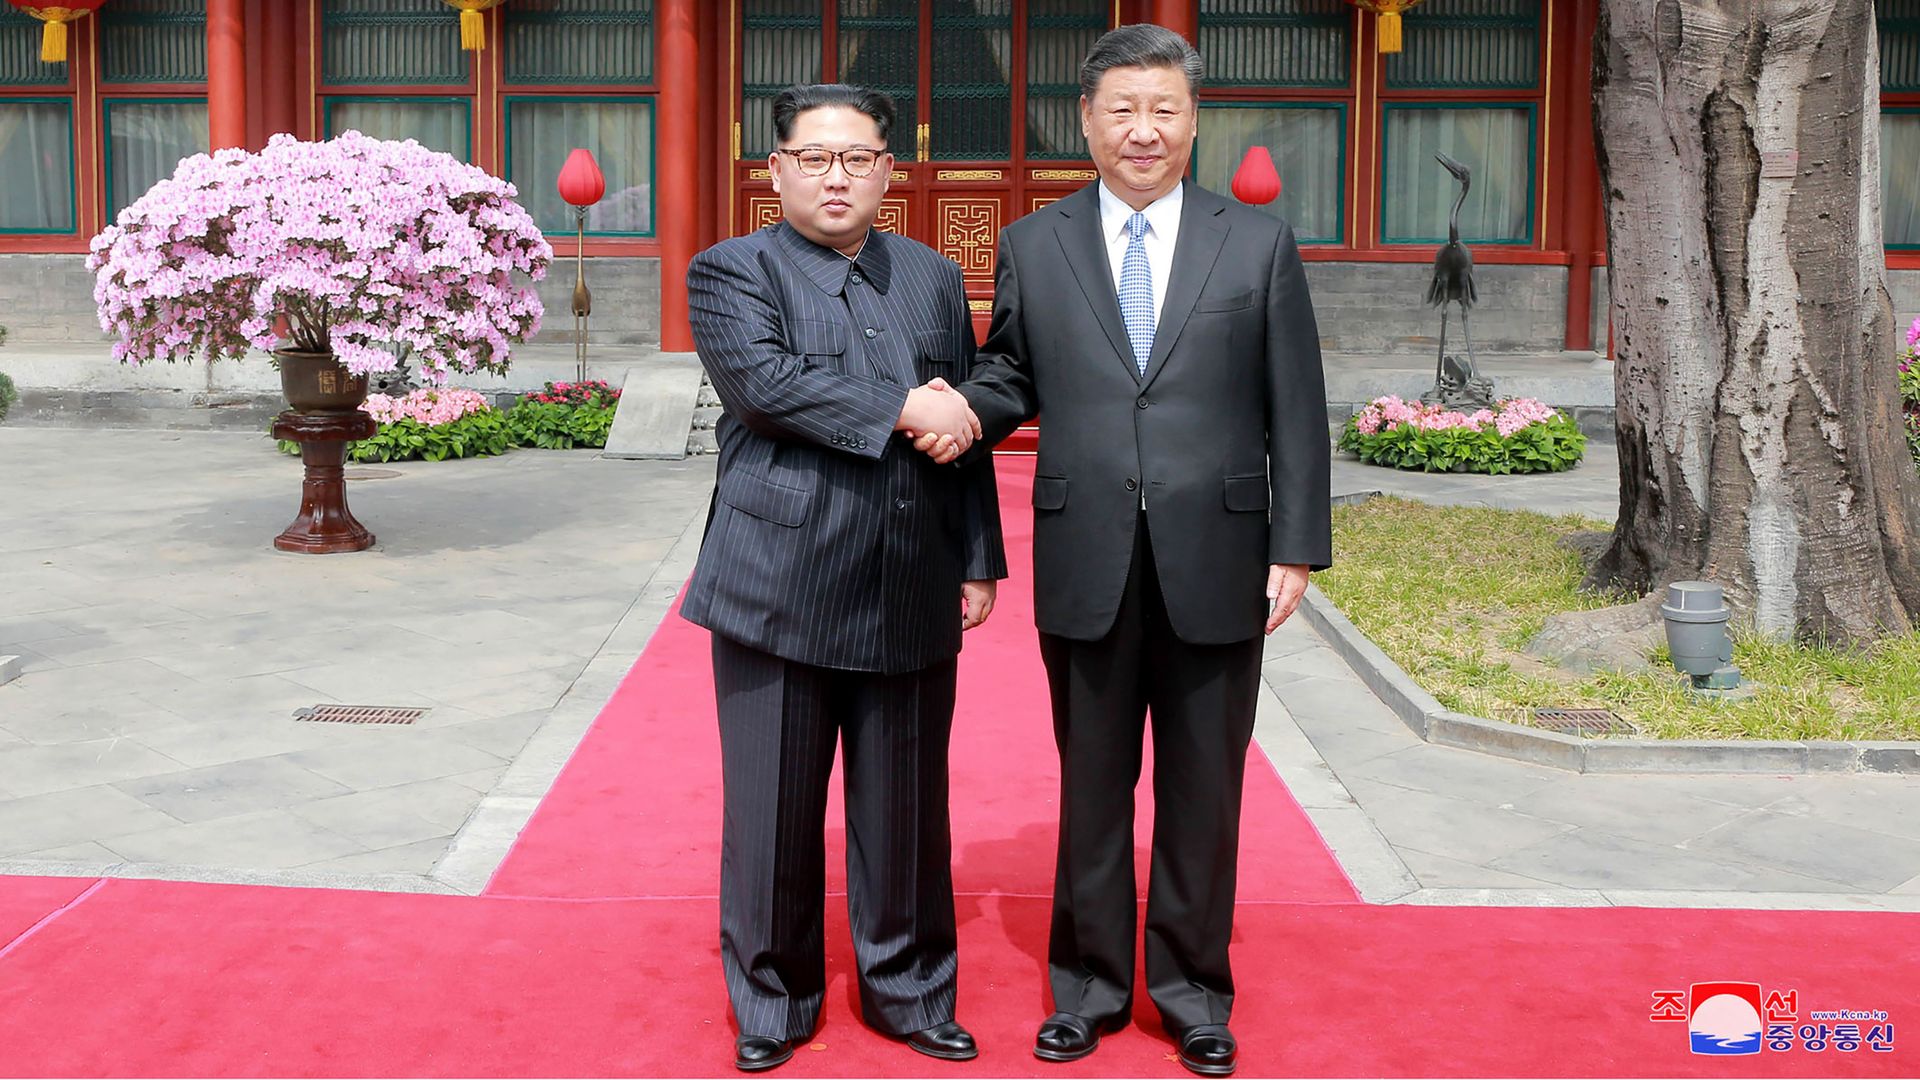 Kim Jong-un and Xi Jinping are shaking hands in the middle of the photo.